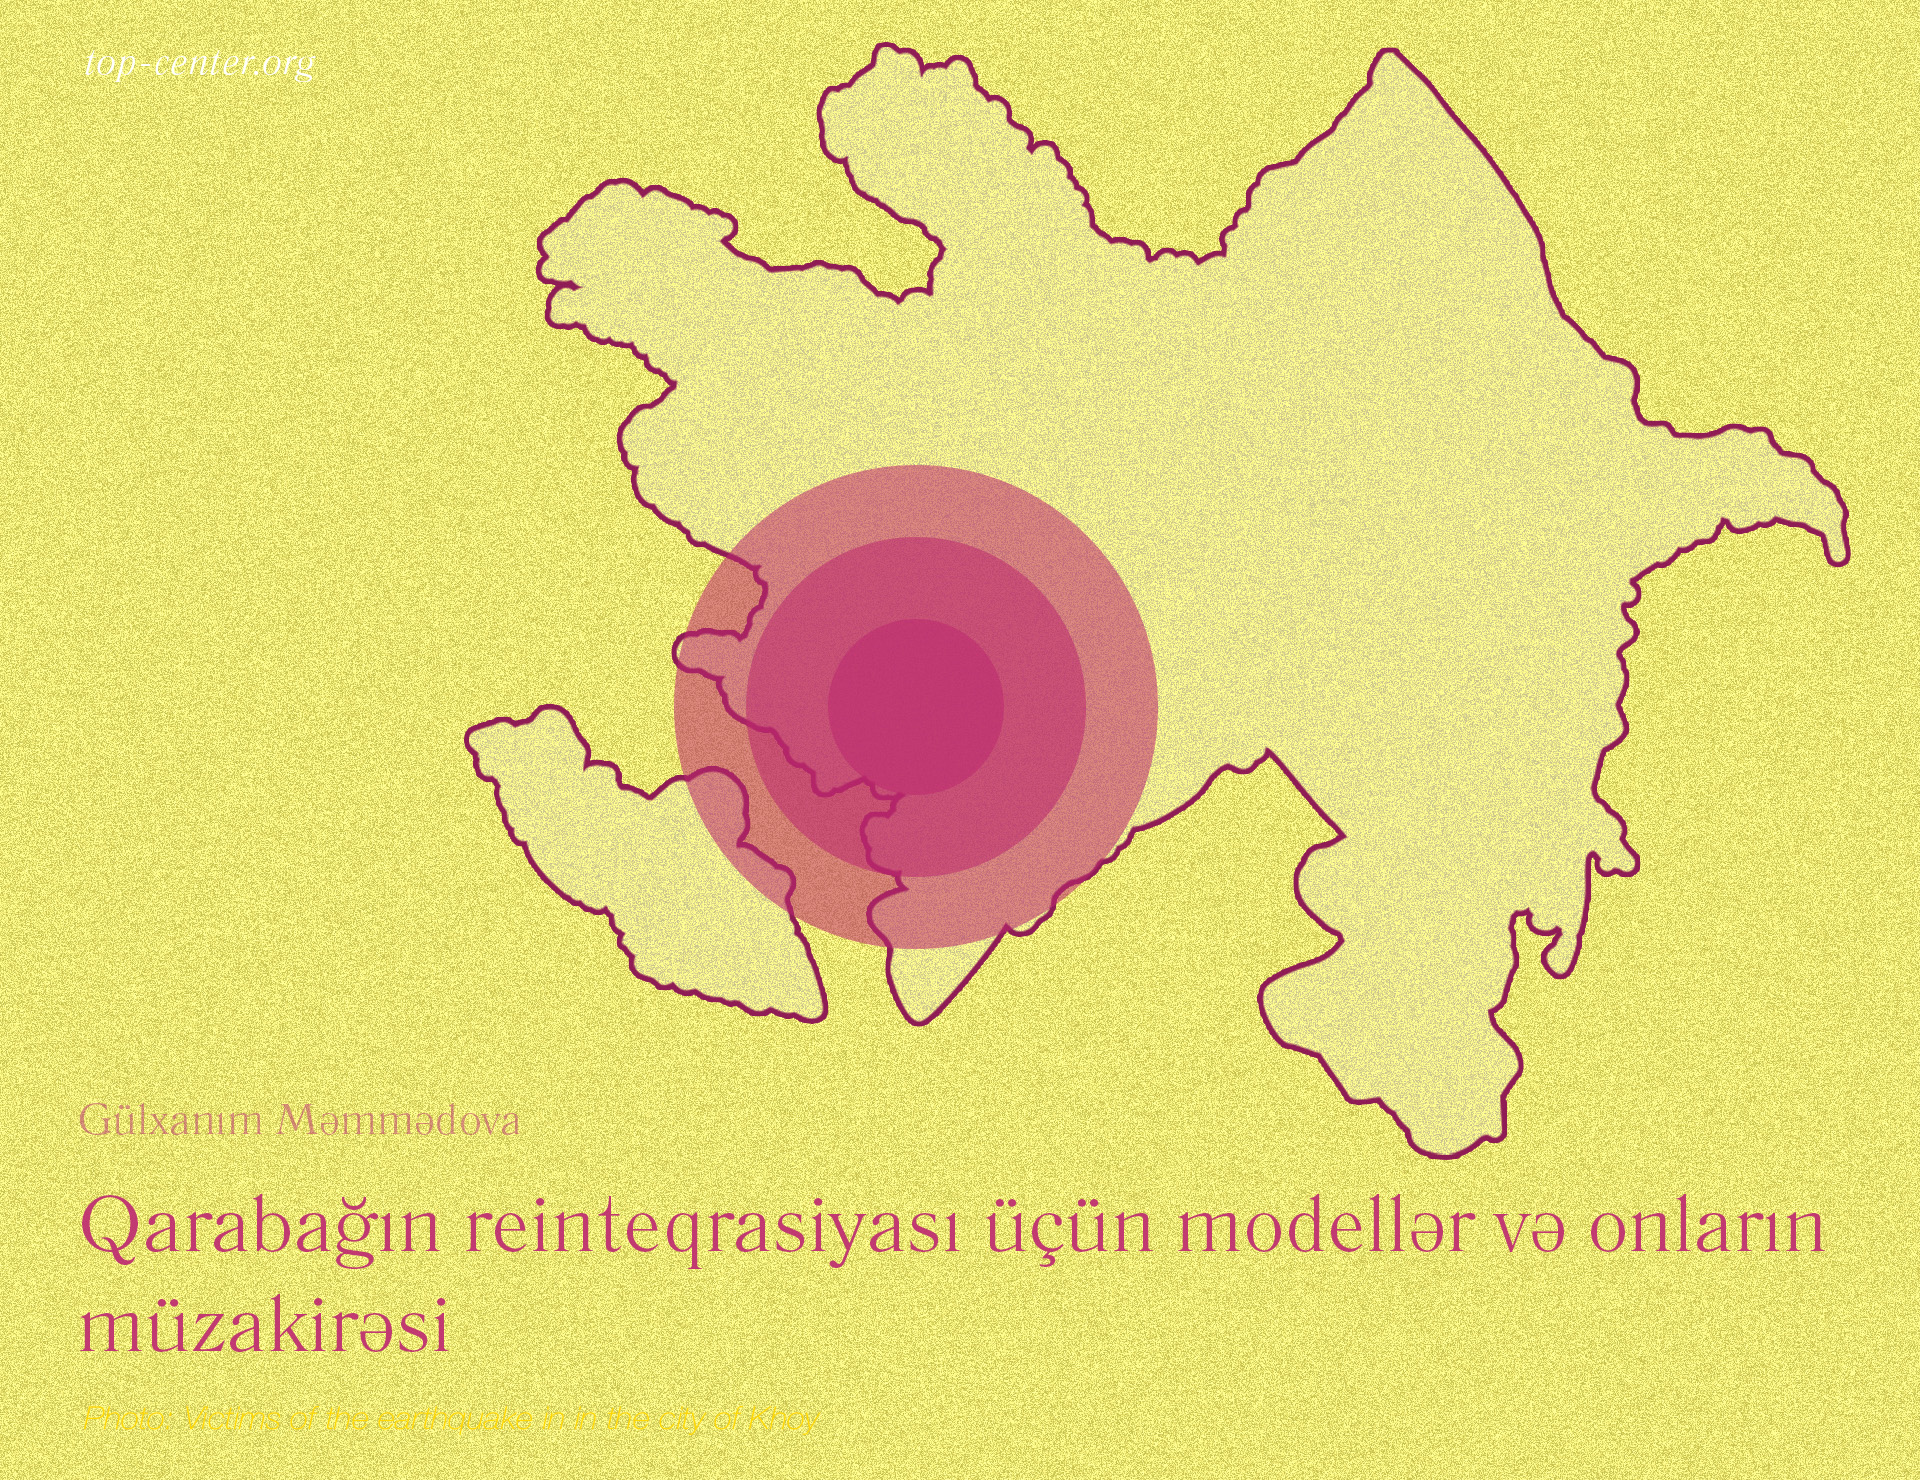 Reintegration of Karabakh: what options are discussed?